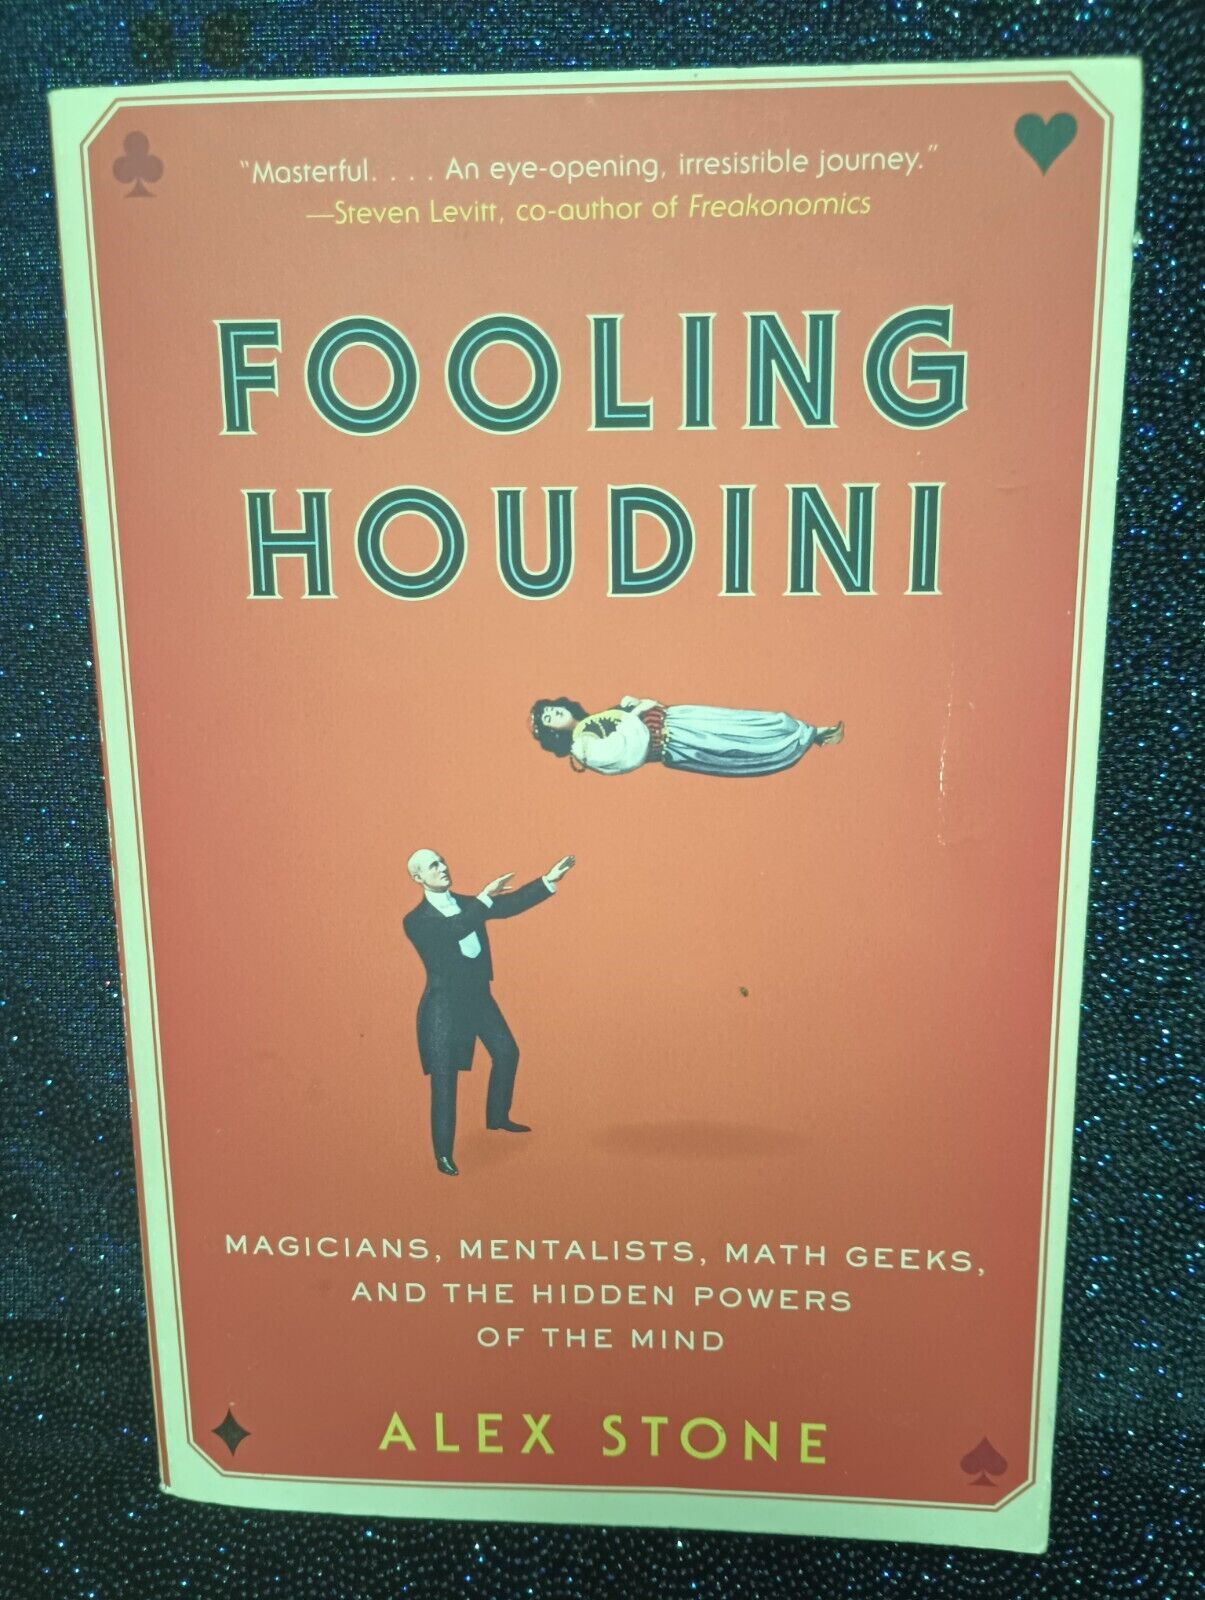 Fooling Houdini: Magicians Mentalists Math Geeks & the Hidden Powers of the Mind